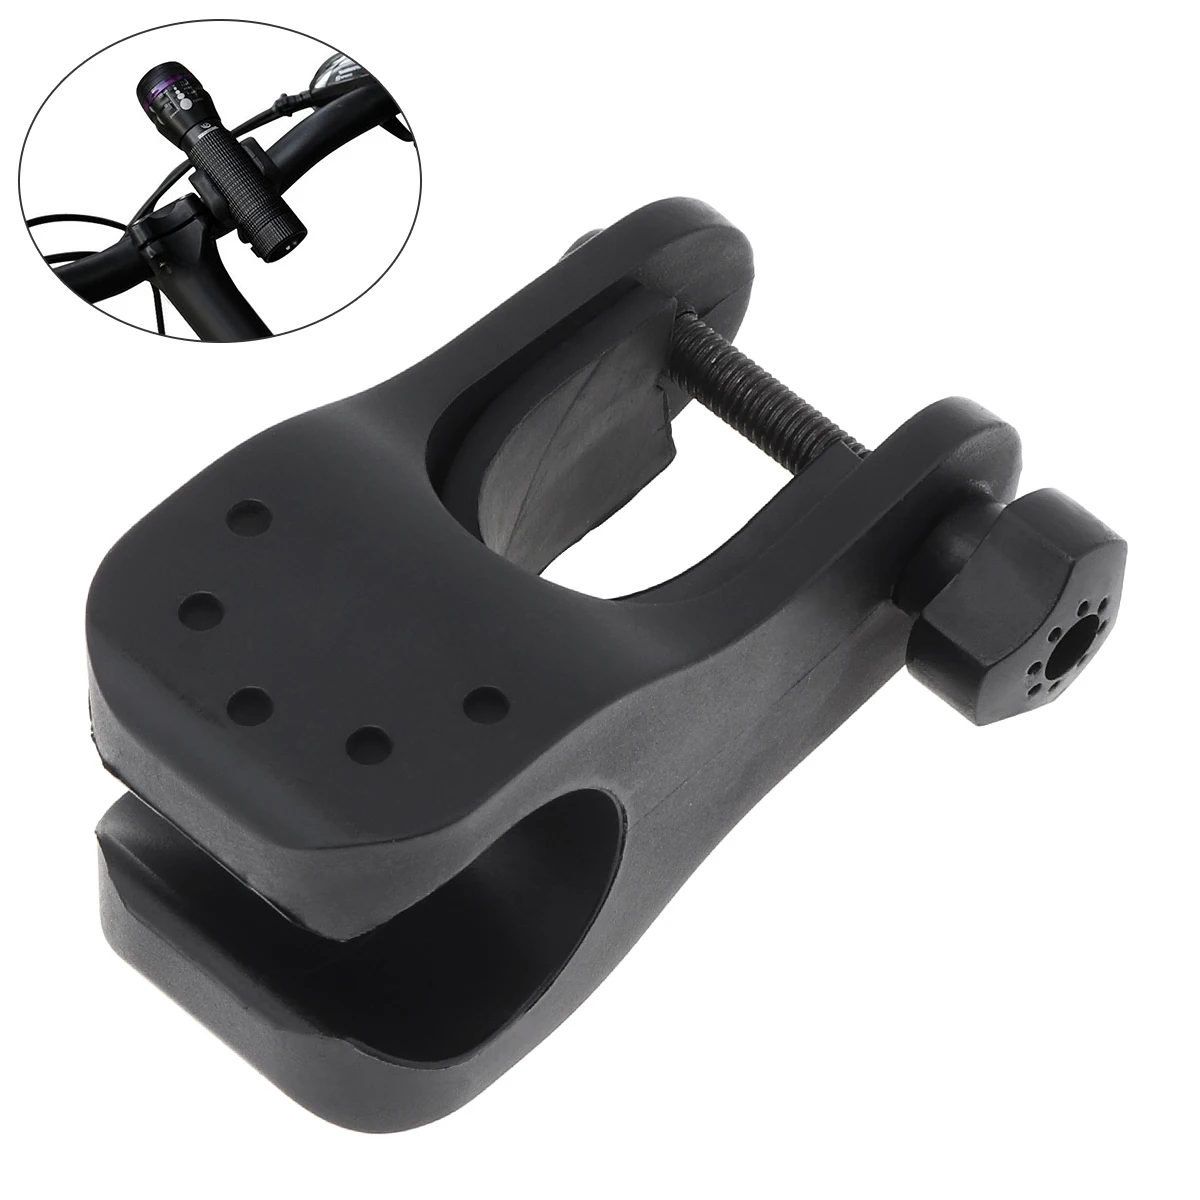 Shatterproof Bicycle Cycle Light Stand Bike Front Mount LED Headlight Holder Clip Rubber for 22-35mm Diameter Flashlight